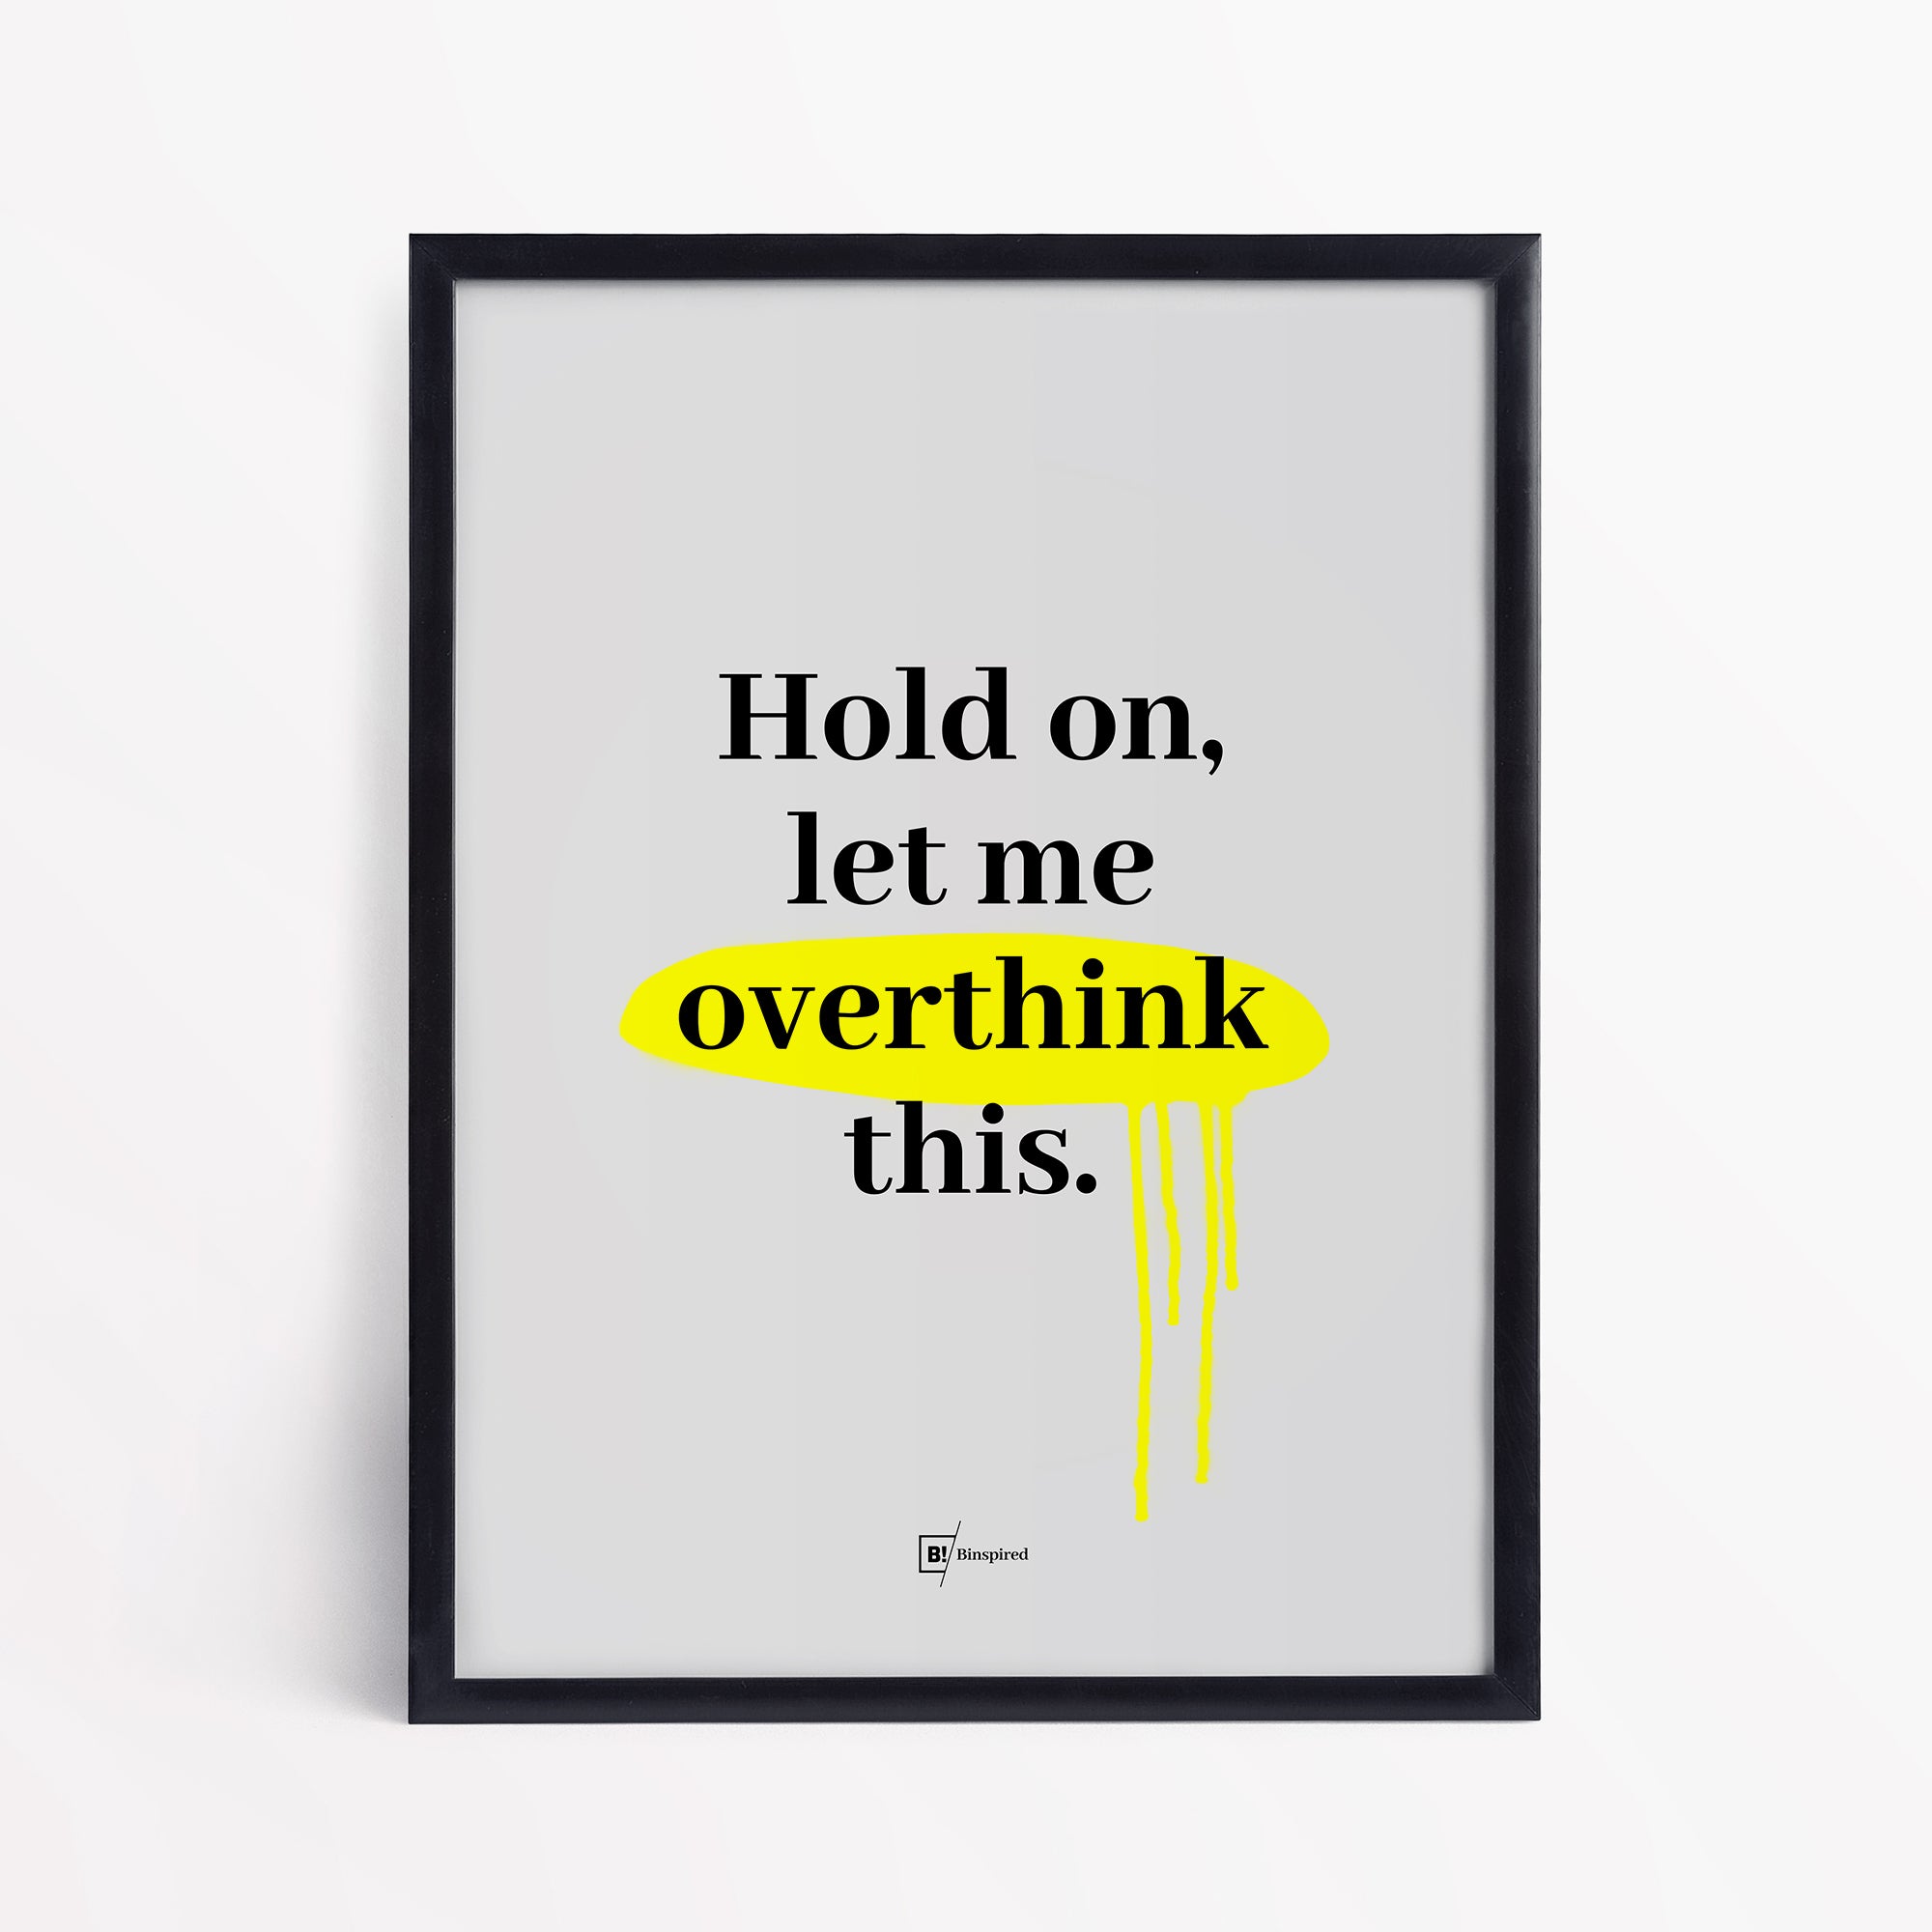 Be inspired by our "Hold on, let me overthink this" quote art print! This artwork was printed using the giclée process on archival acid-free paper and is presented in a simple black frame that captures its timeless beauty in every detail.